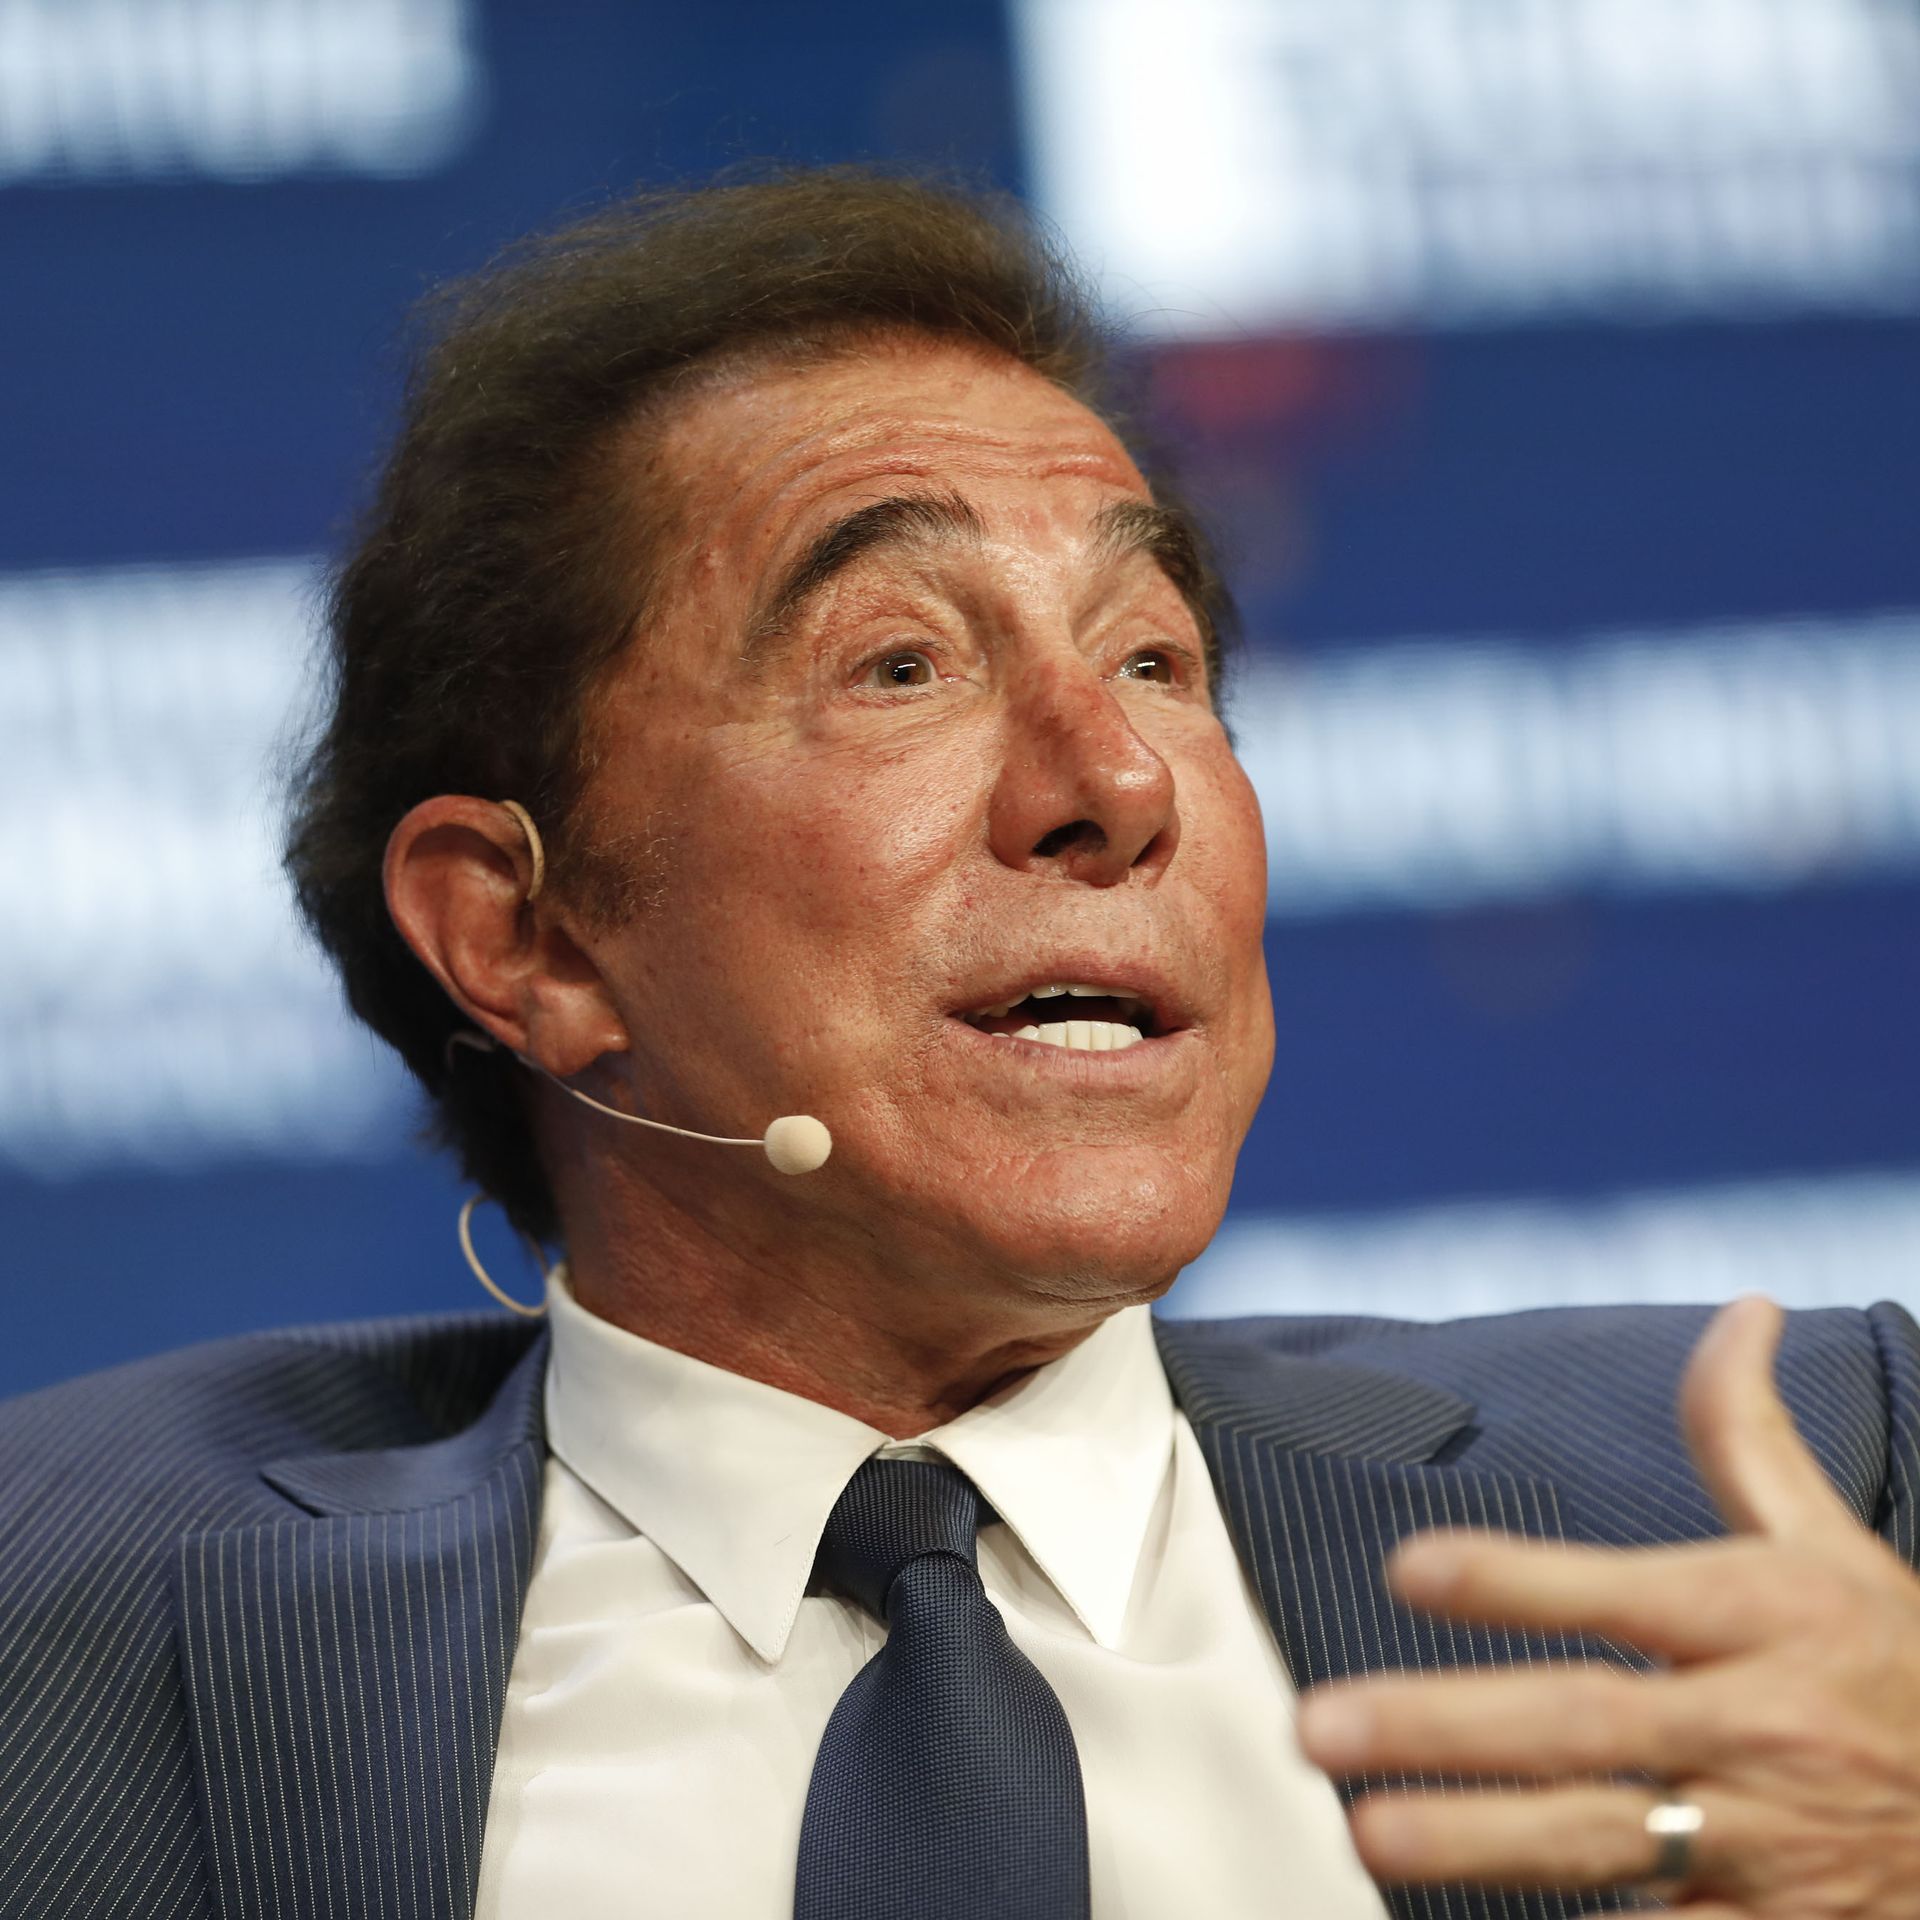 Casino magnate and Republican fundraiser Steve Wynn speaks at a conference.